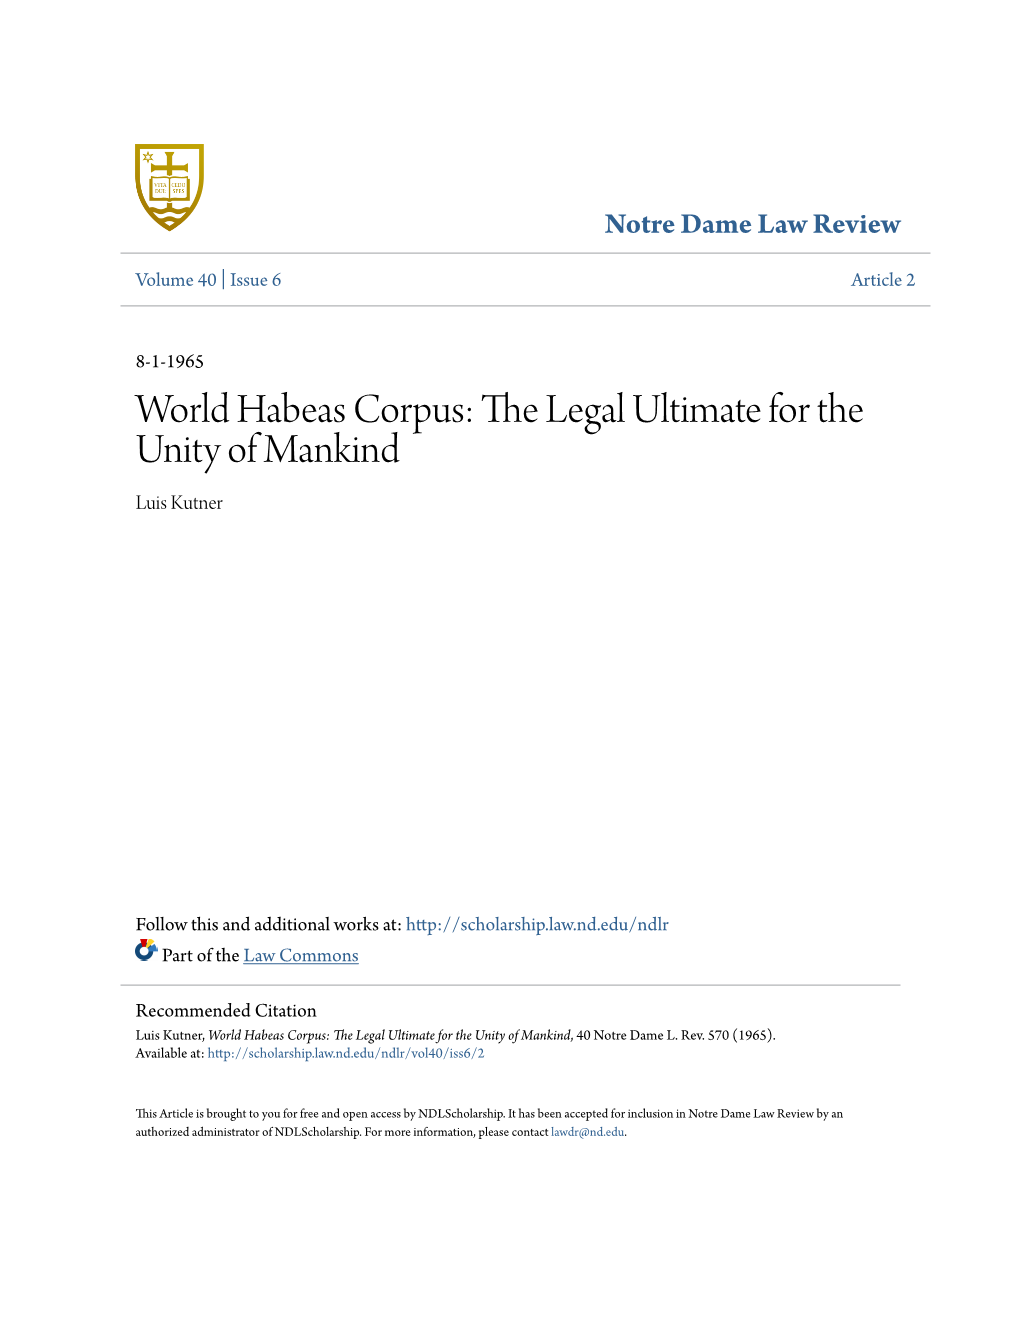 World Habeas Corpus: the Legal Ultimate for the Unity of Mankind Luis Kutner